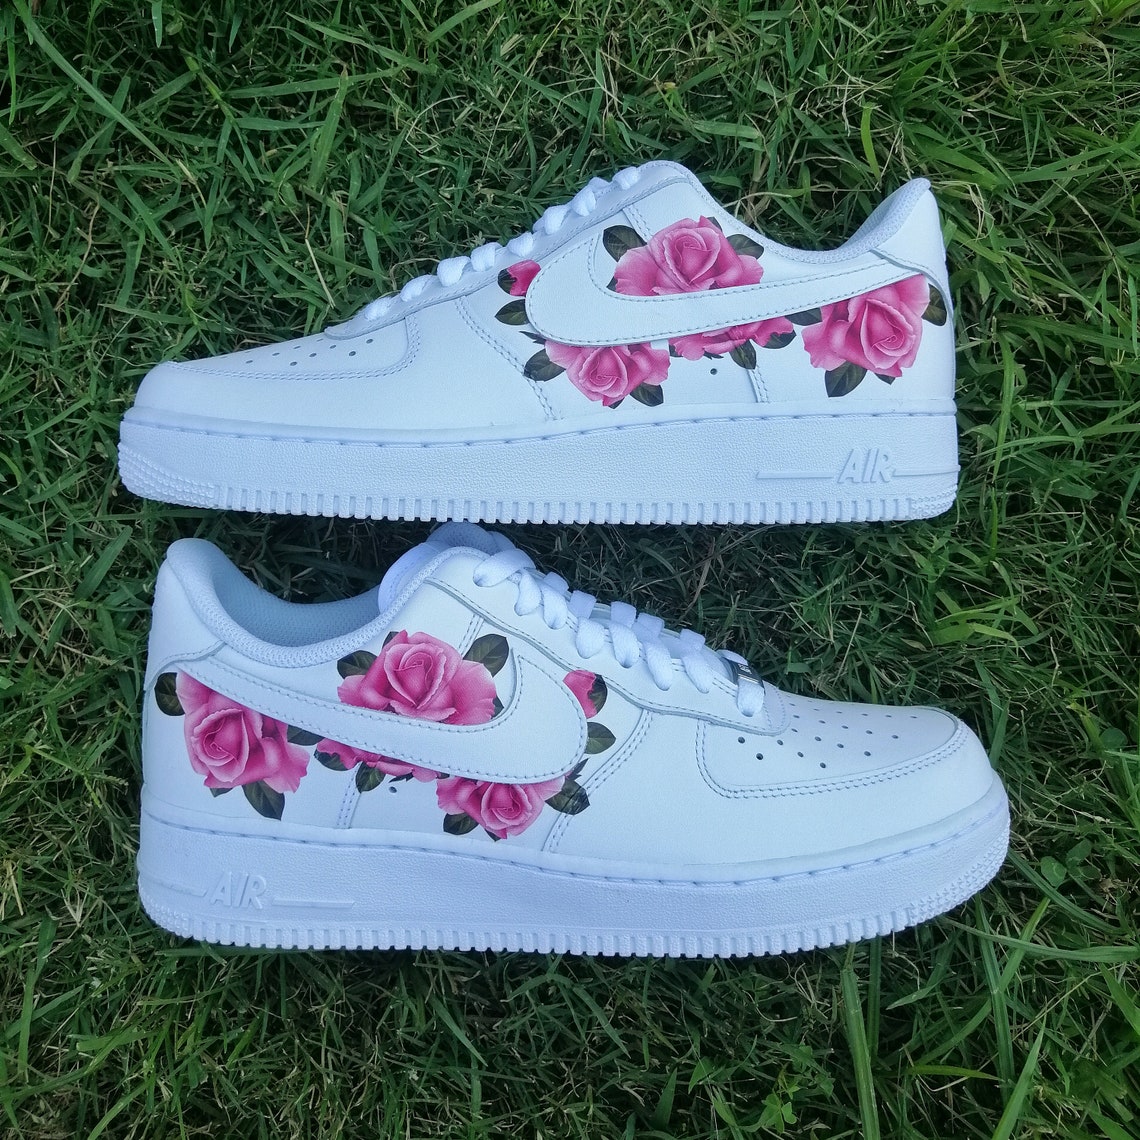 Rose Air Forses 1 Flower Pink Nike Air Force 1 woman | Etsy